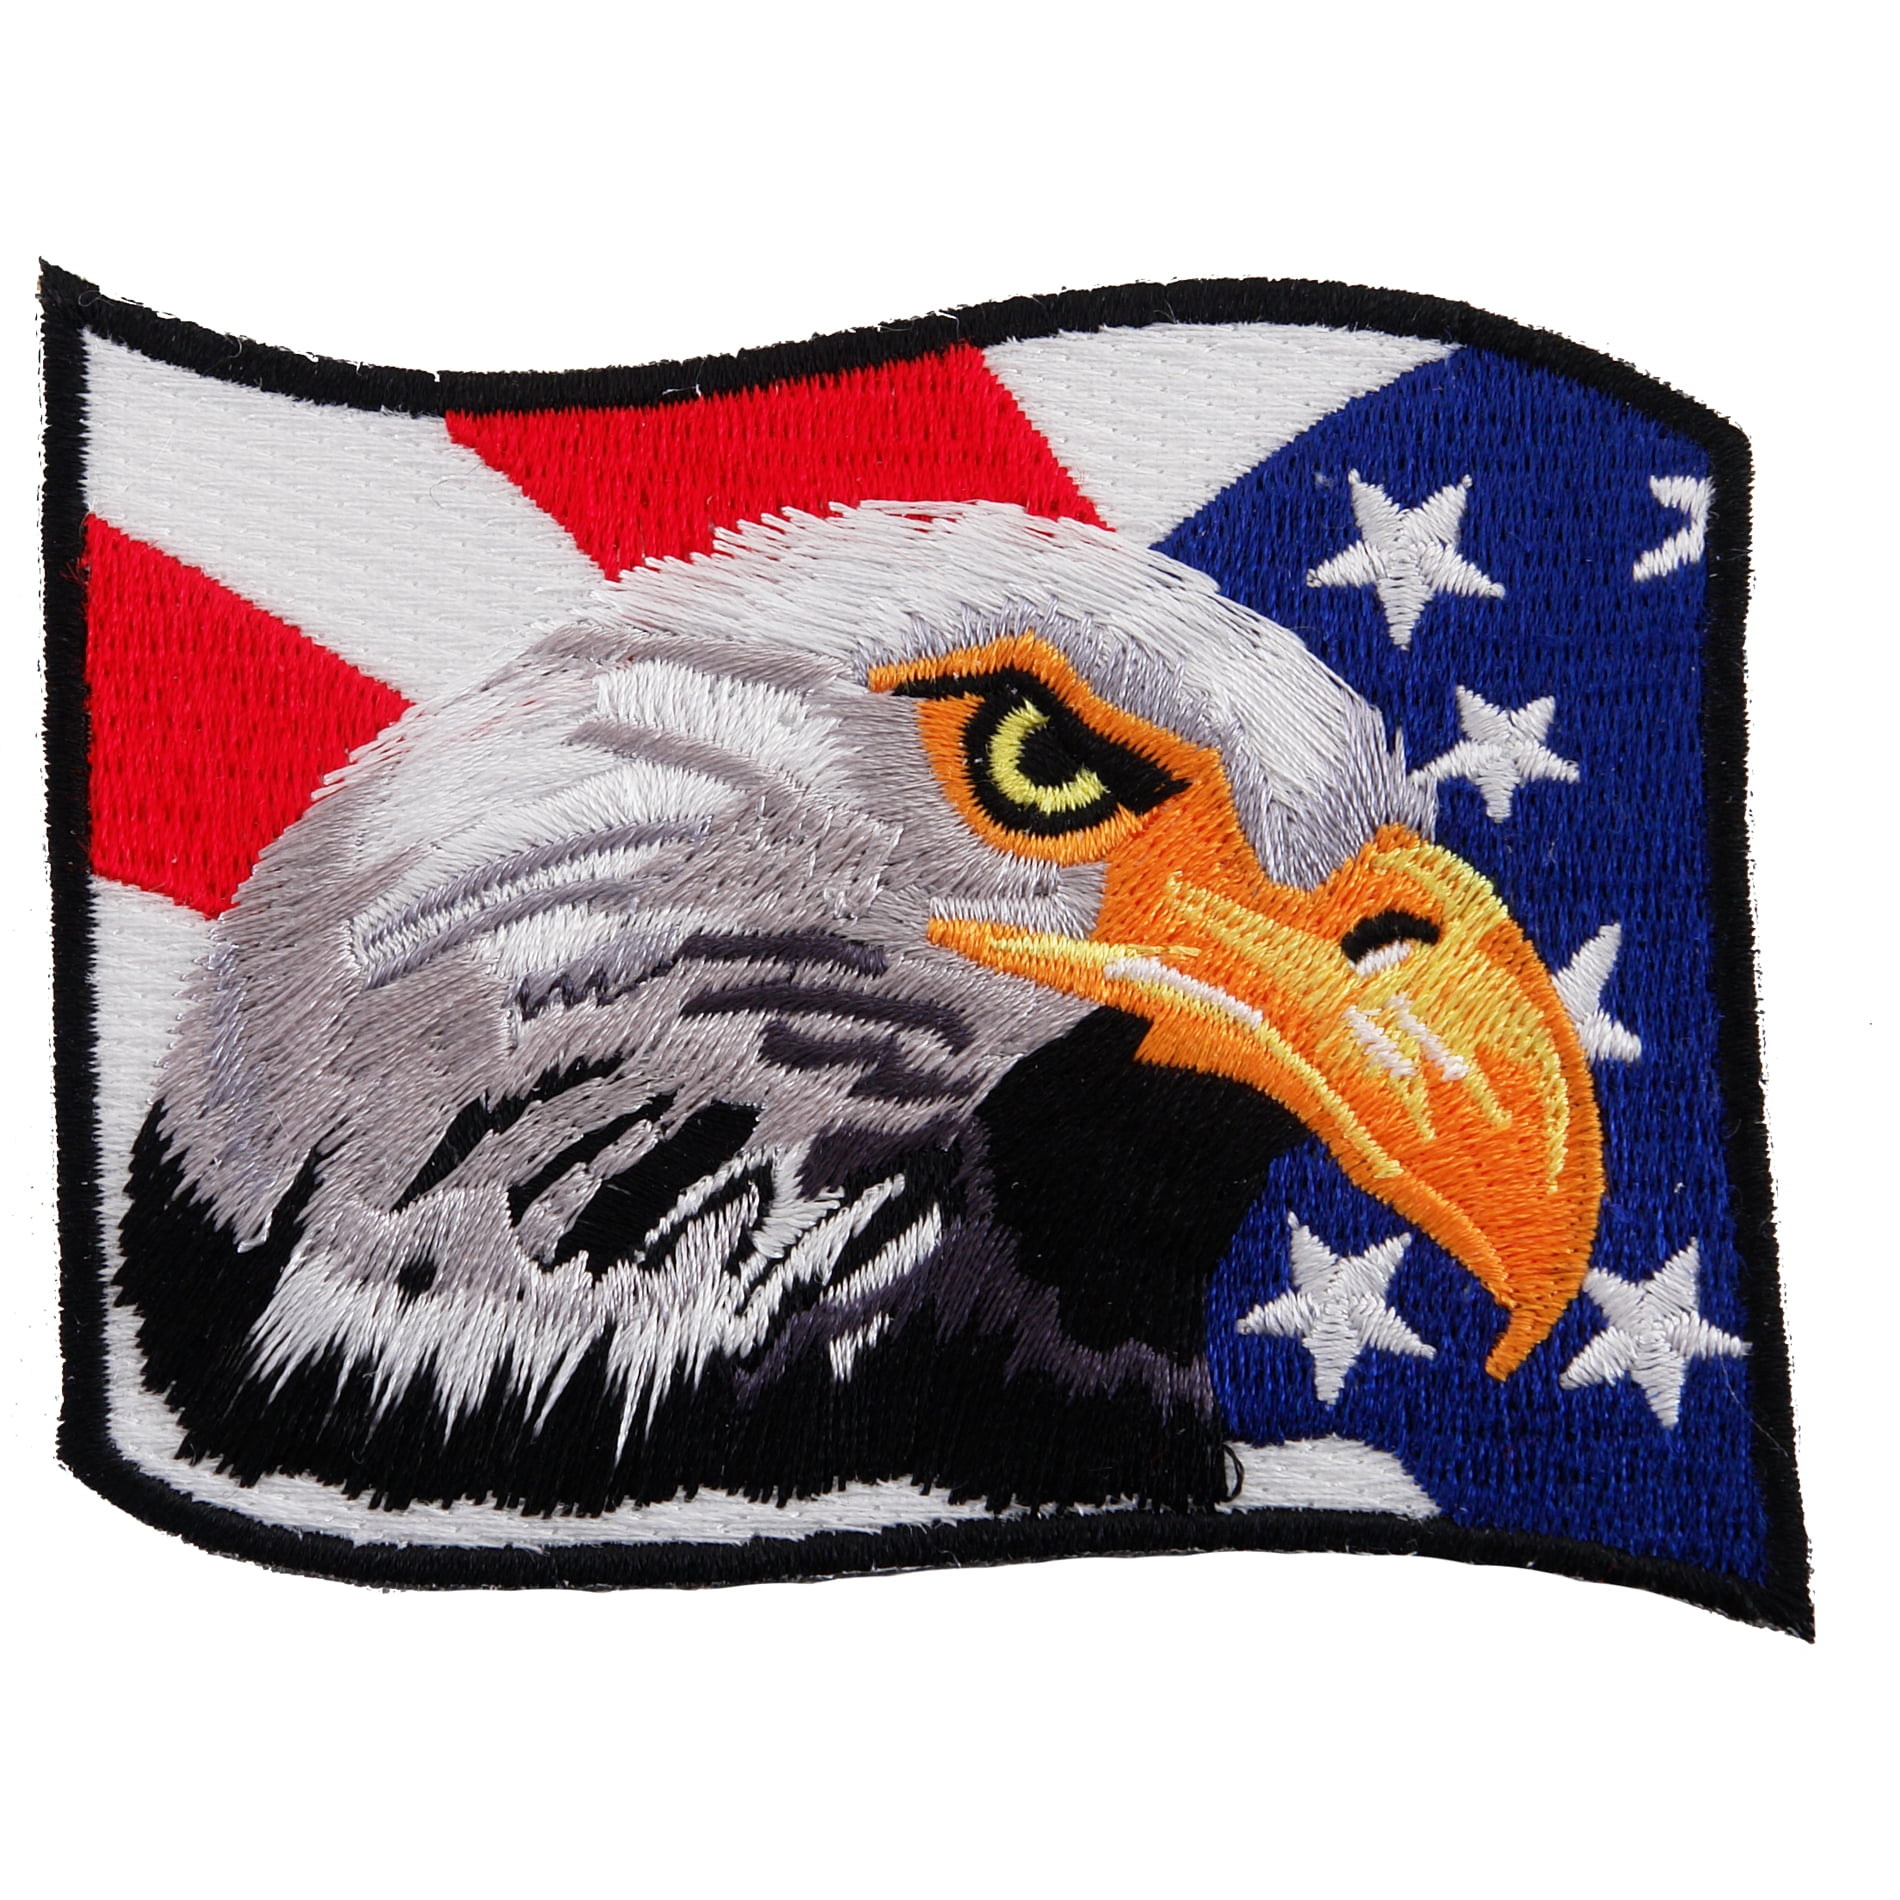 Iron on Soaring Bald Eagle Applique Patch